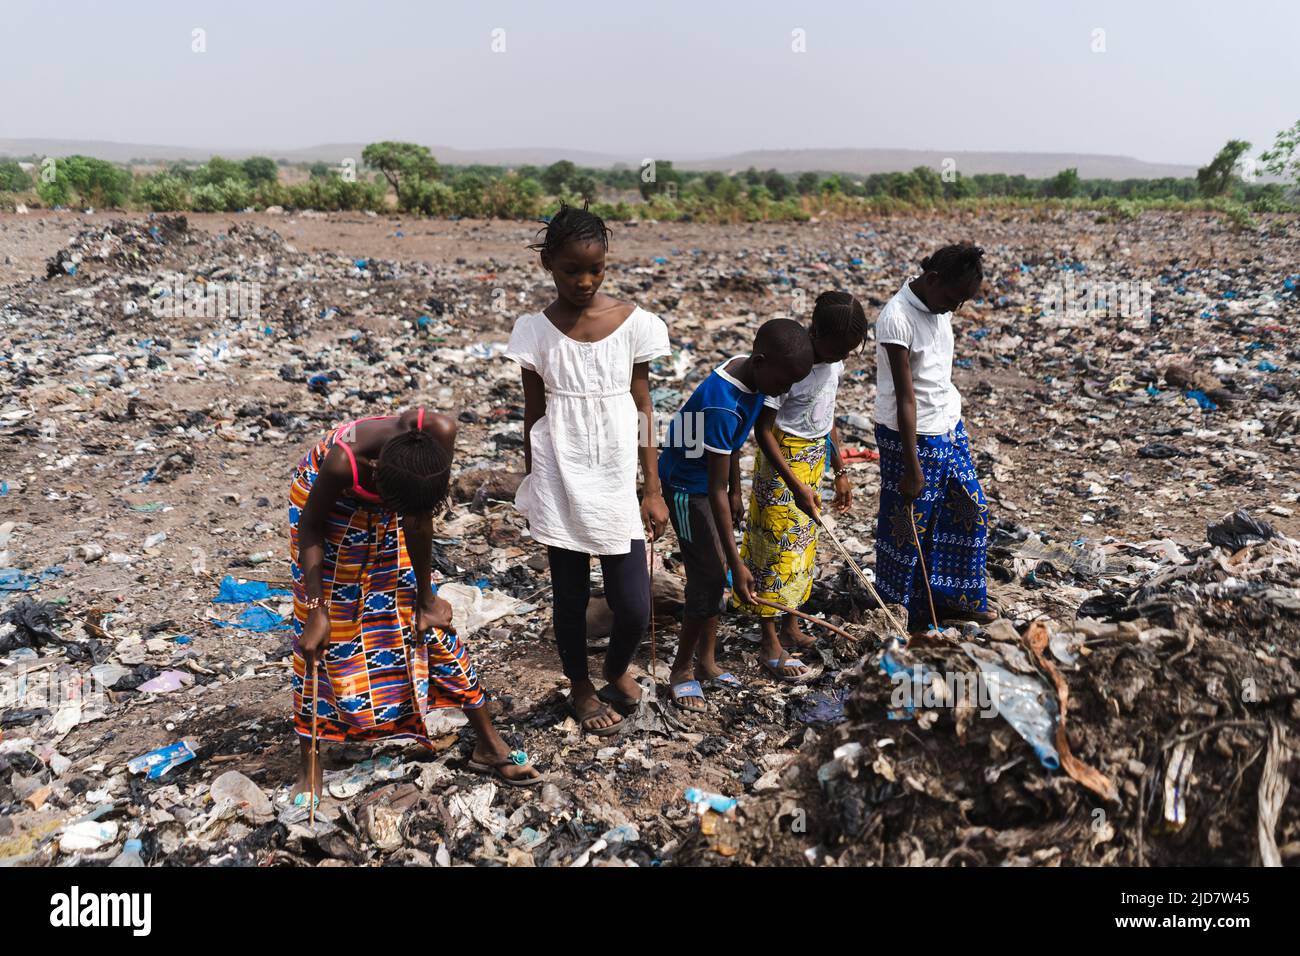 Group of children rummaging through a field covered with waste to find recyclable material to sell, a symbol of extreme poverty in sub-Saharan areas Stock Photo